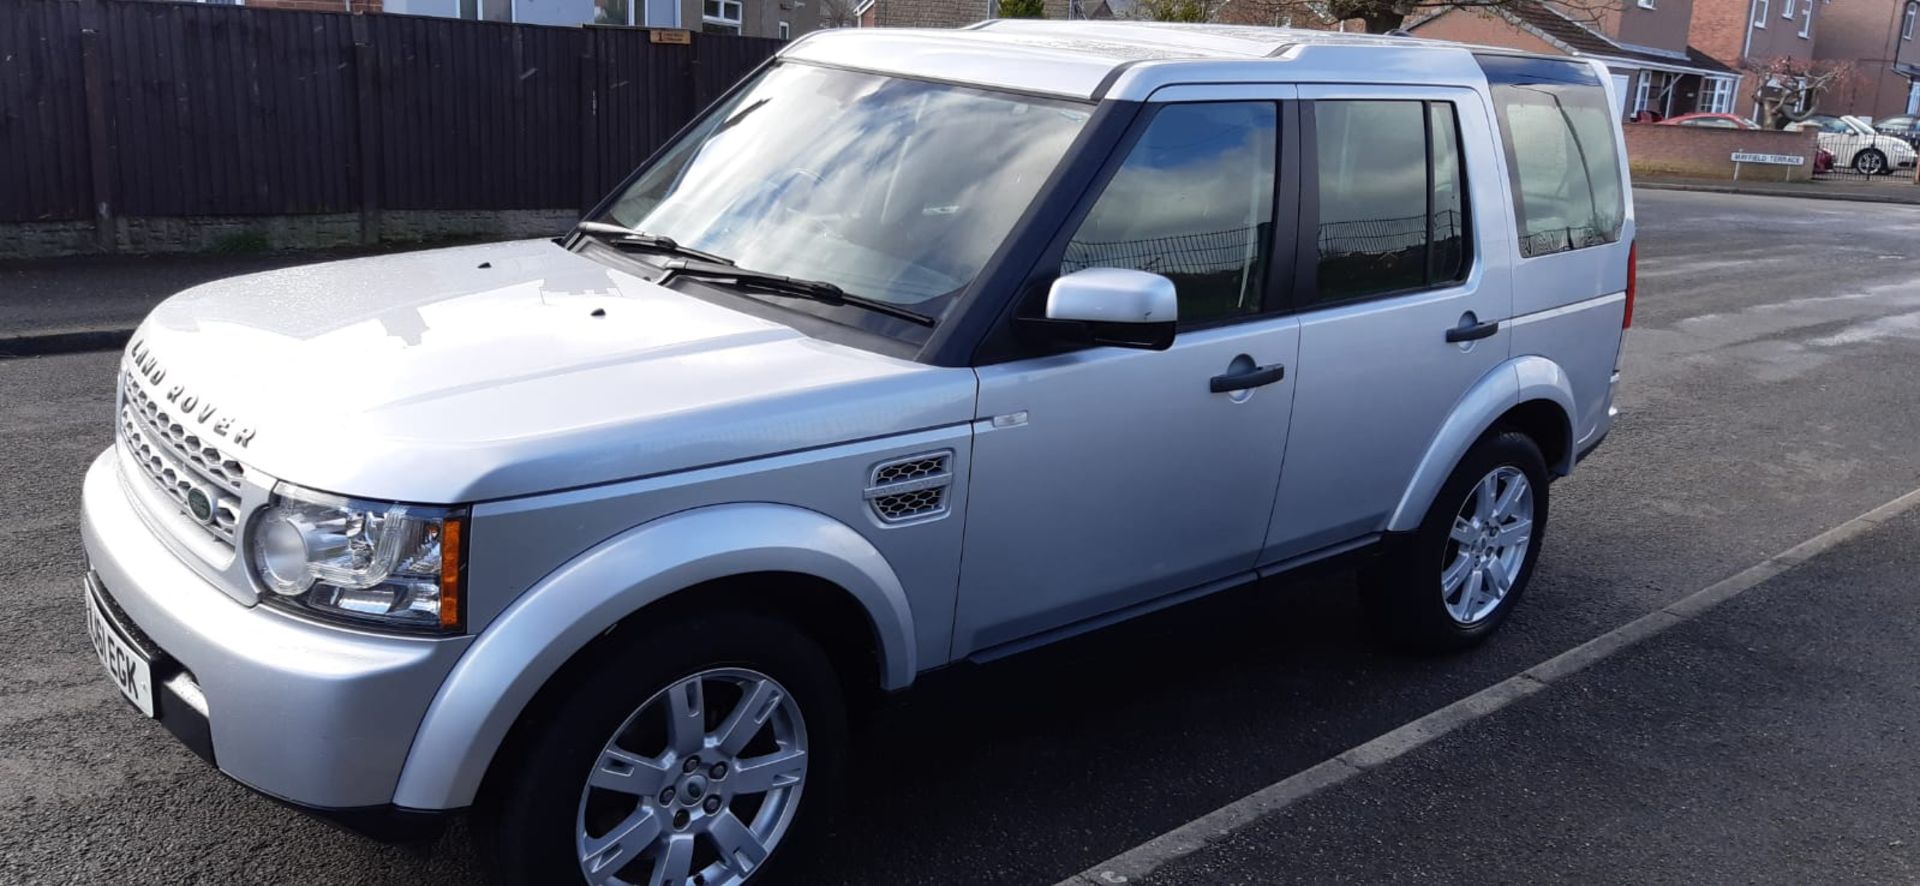 LAND ROVER DISCOVERY GS SDV6 AUTO 7 SEATER SILVER ESTATE, 127K MILES *NO VAT* - Image 5 of 16